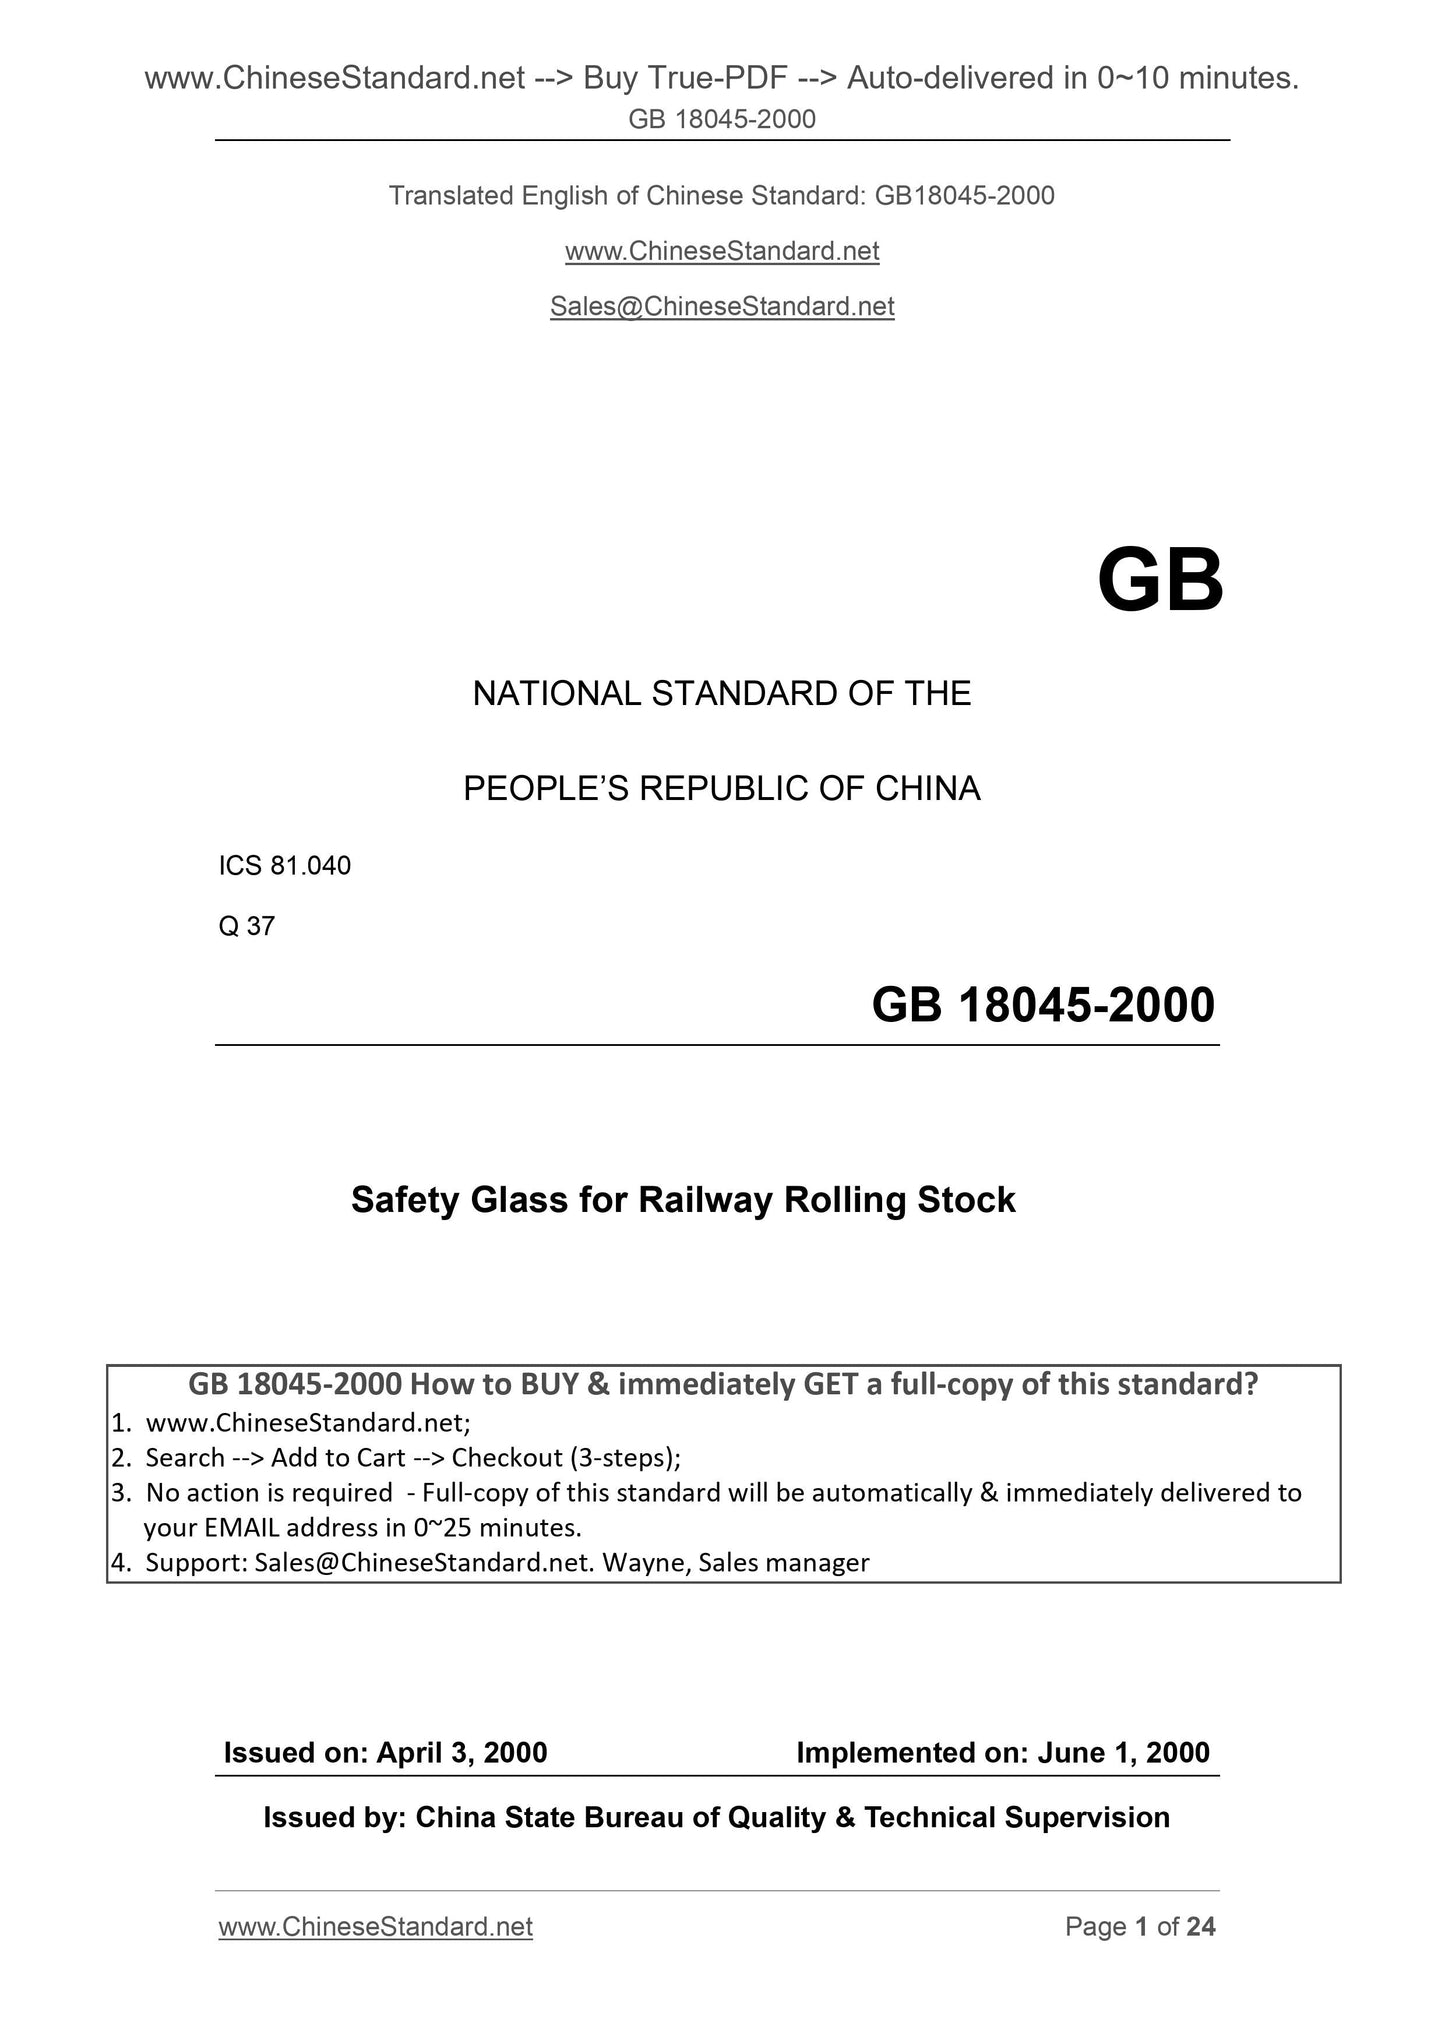 GB 18045-2000 Page 1